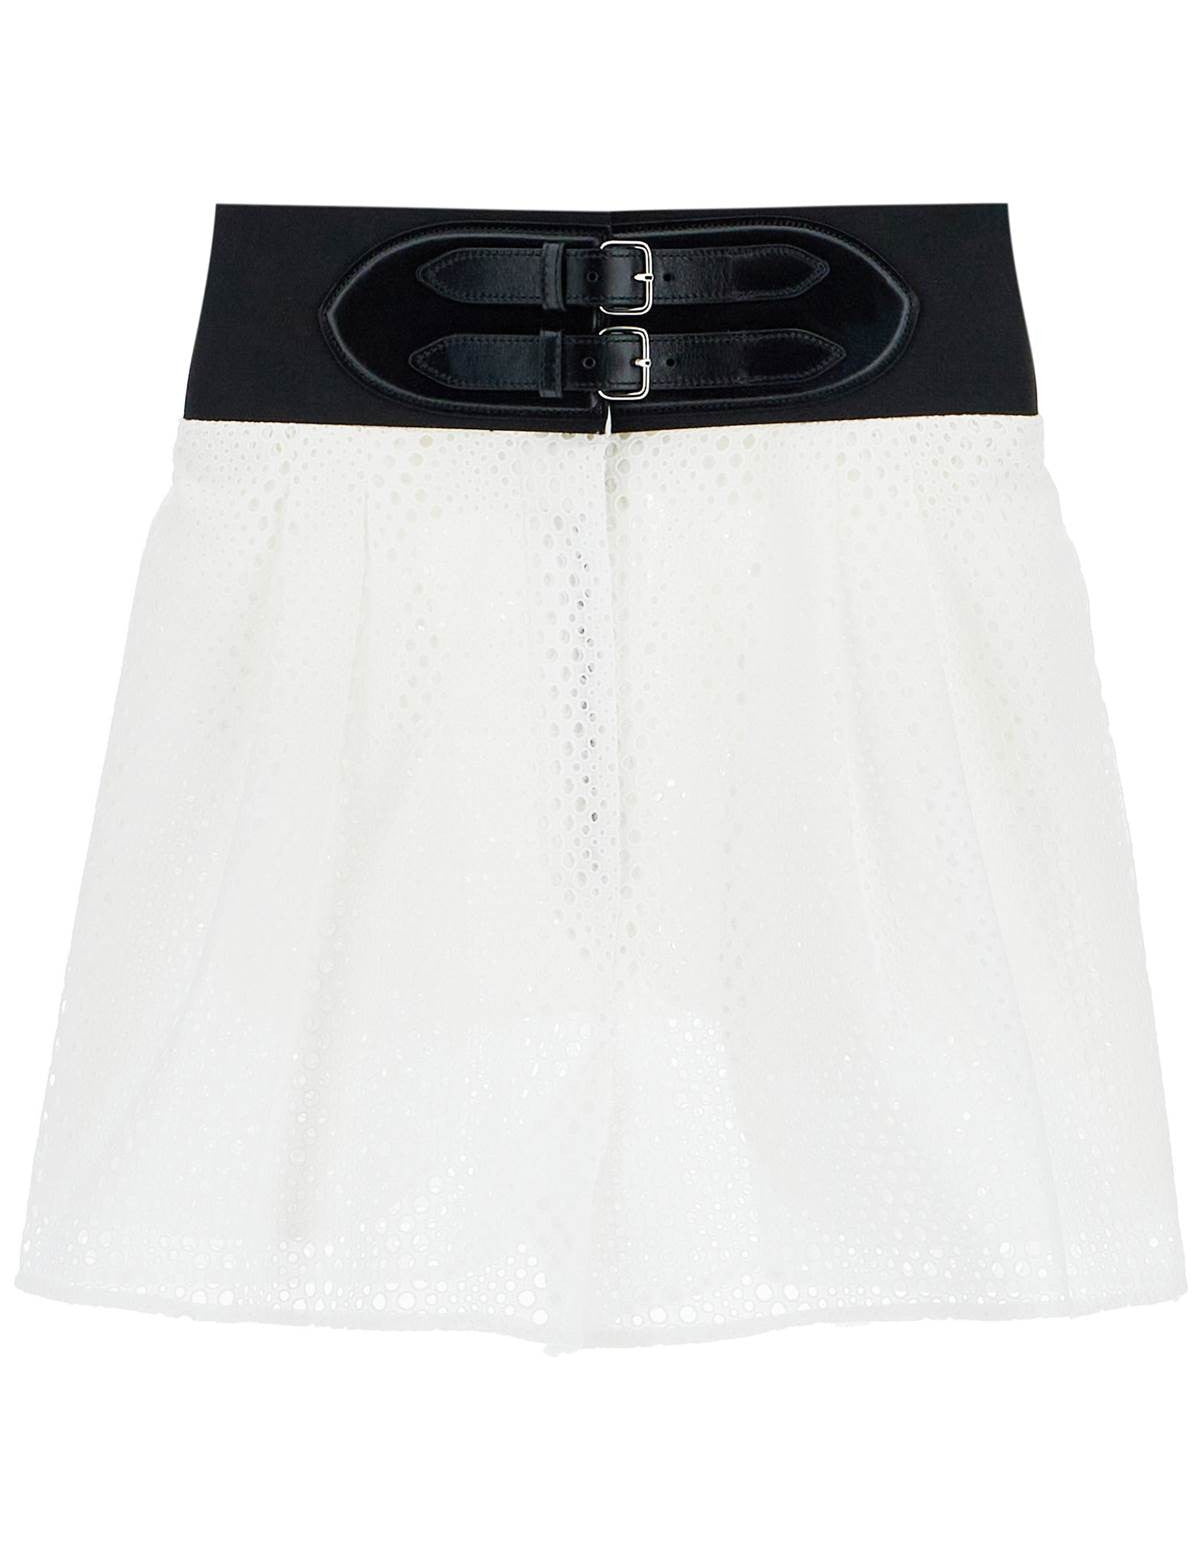 alaia-belted-broderie-shorts.jpg